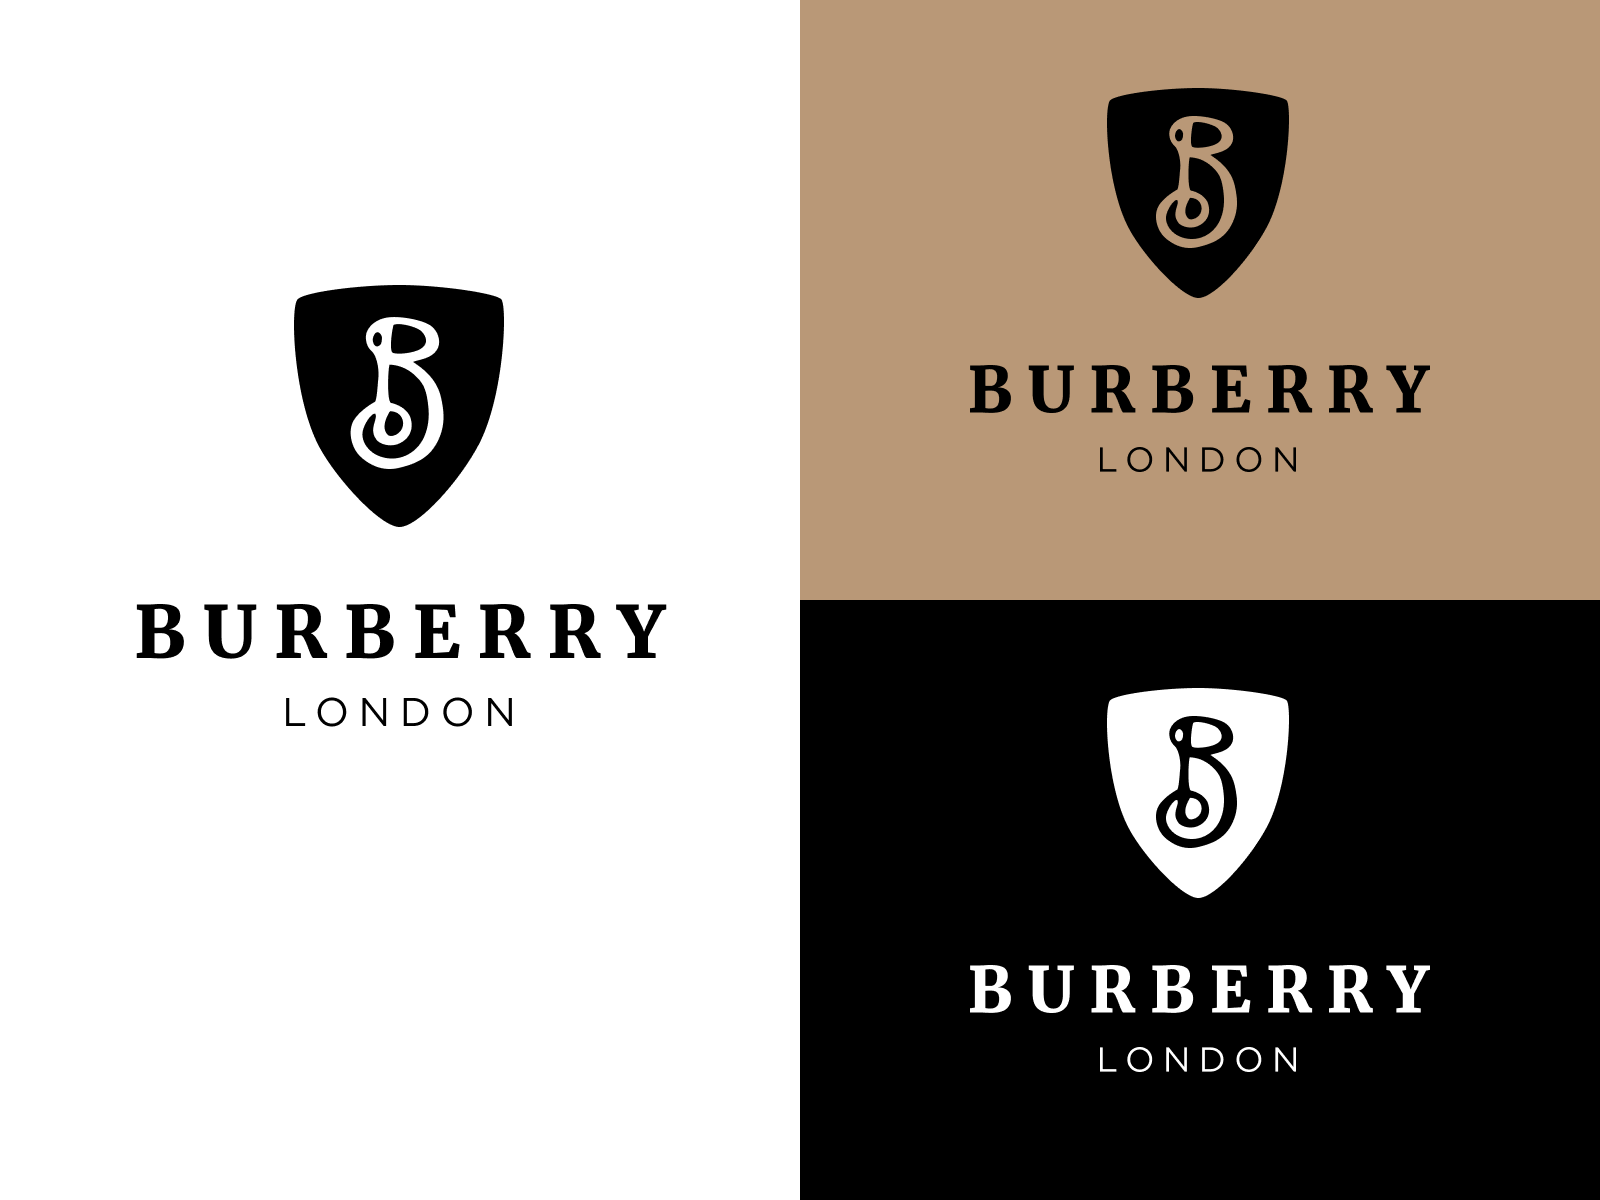 Burberry Rebrand by Gina Chee on Dribbble